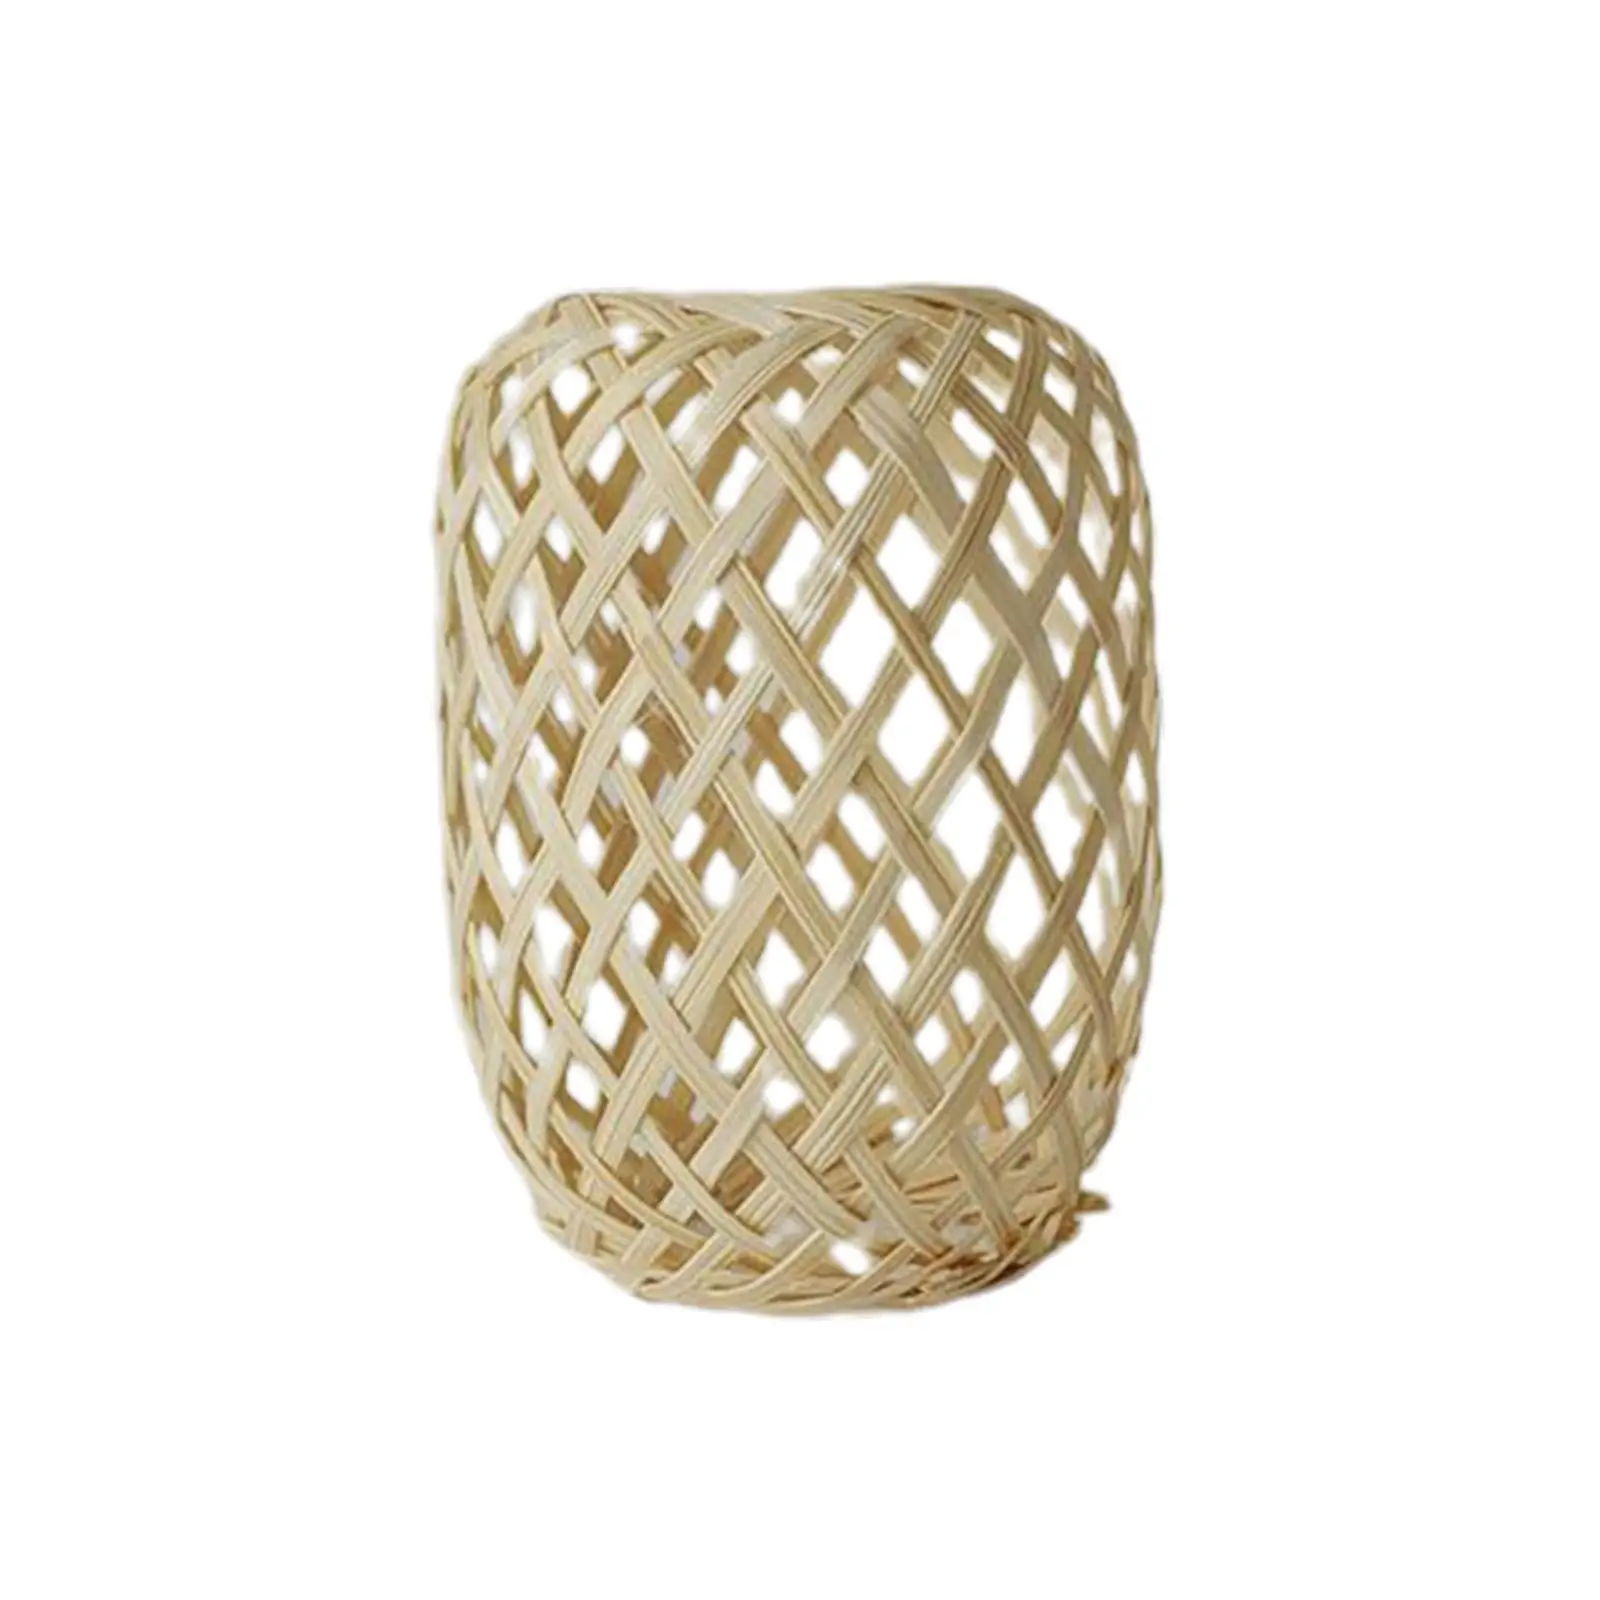 Retro Style Lantern Ornament Bamboo Woven Lamp Shade for Bedroom Living Room Auto